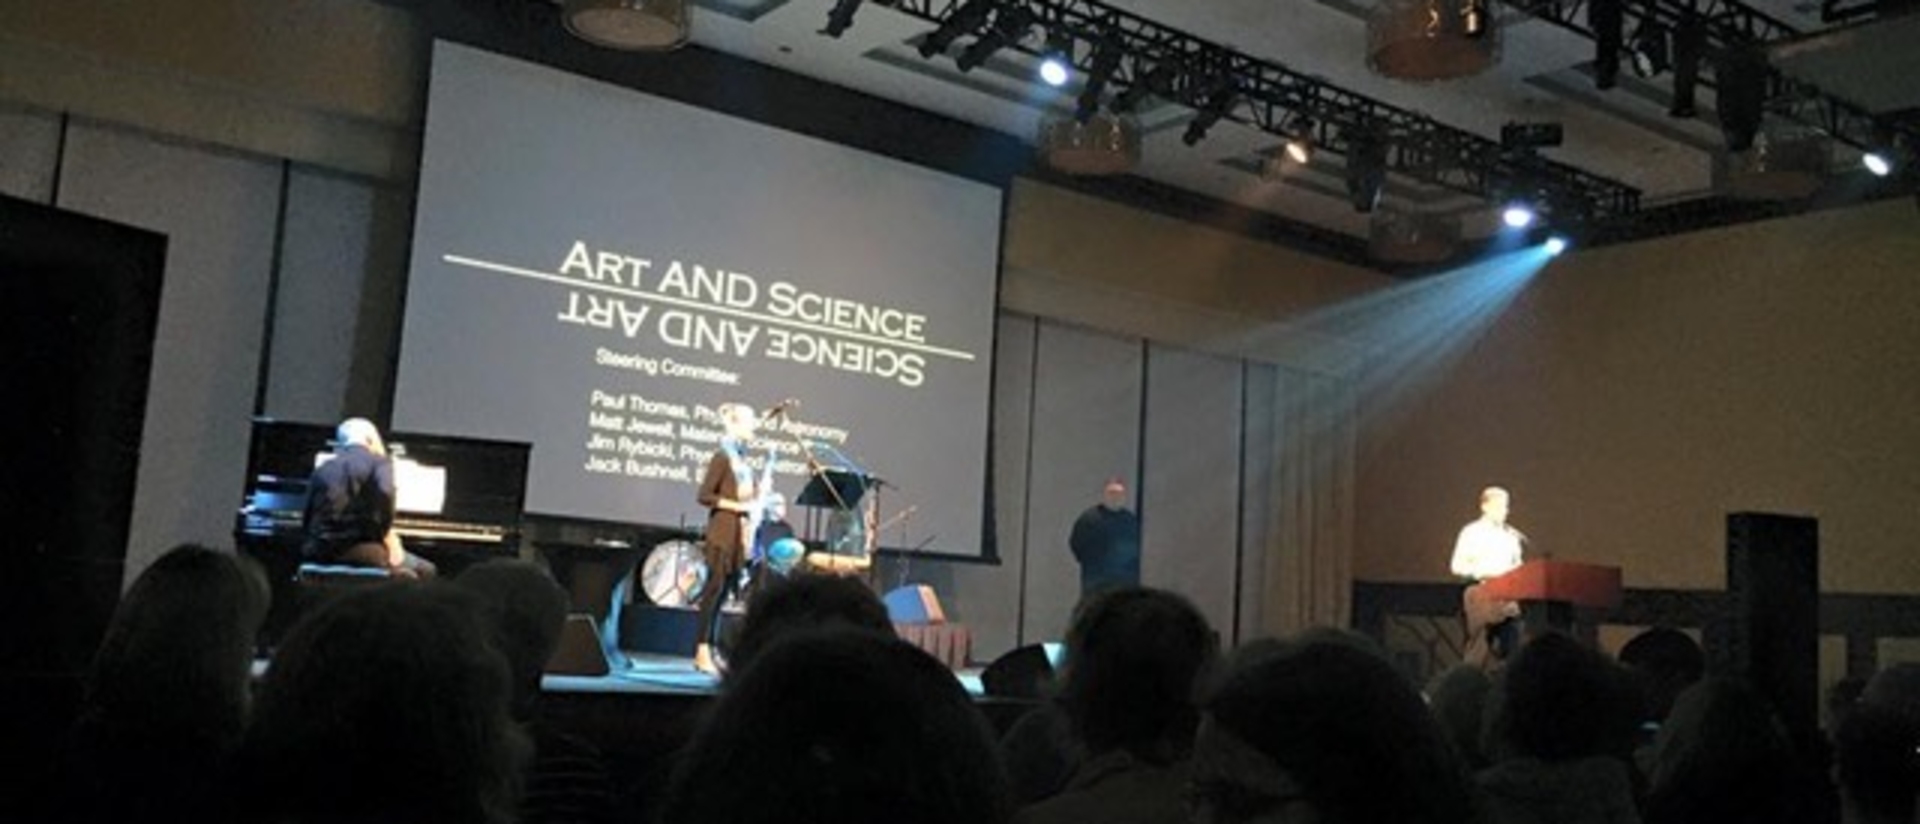 Art AND Science event